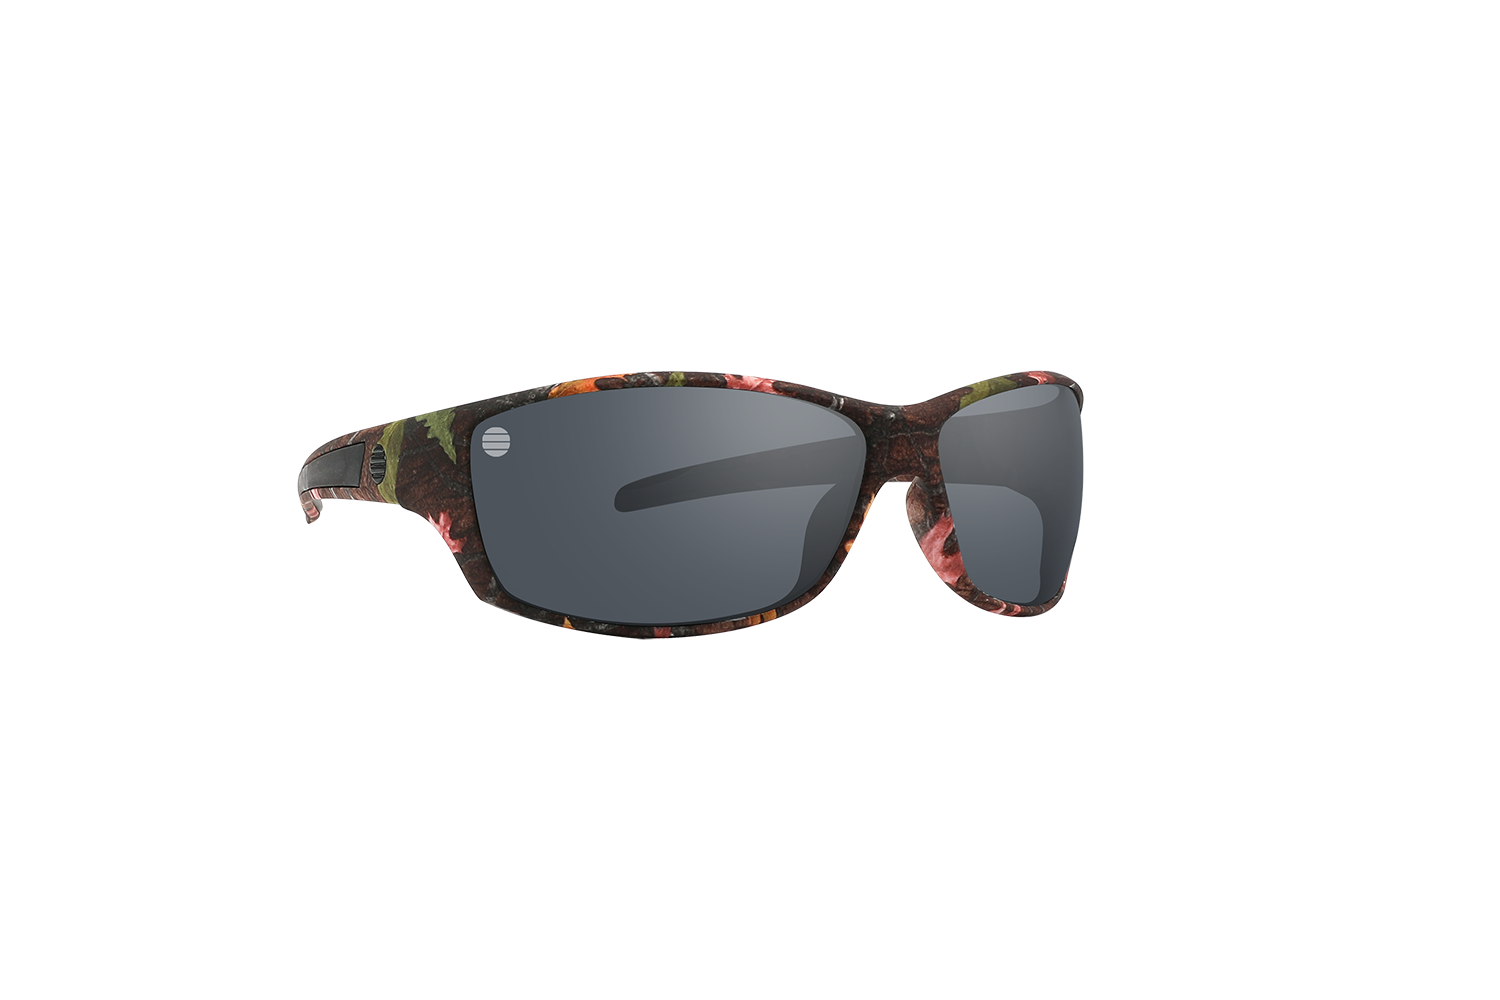 Men's Camouflage Sunglasses (Less than $10 in the store)